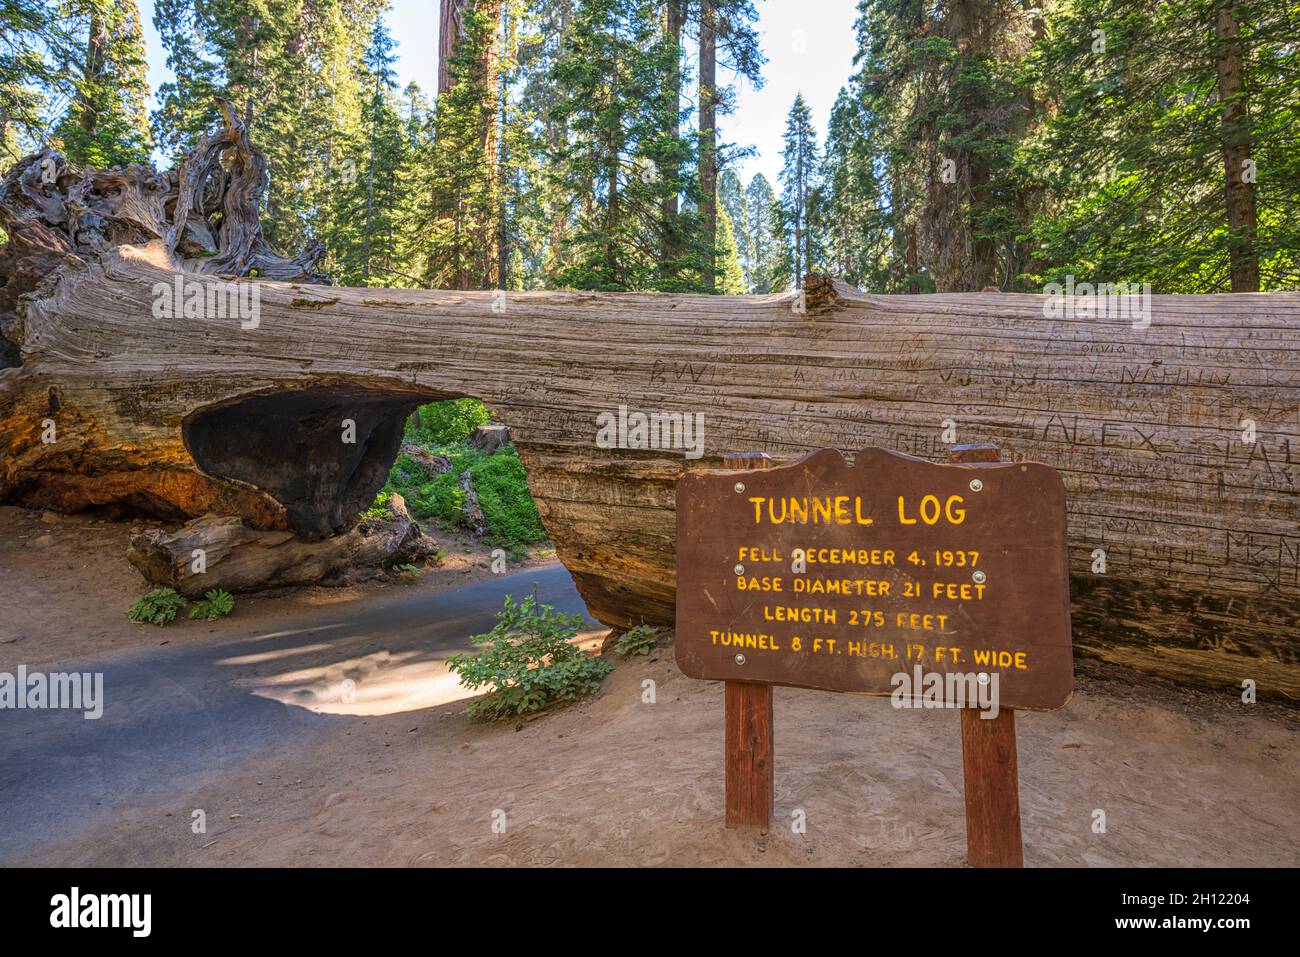 The drive through Tunnel Log at Sequoia National Park. Tulare County, CA, USA. Stock Photo